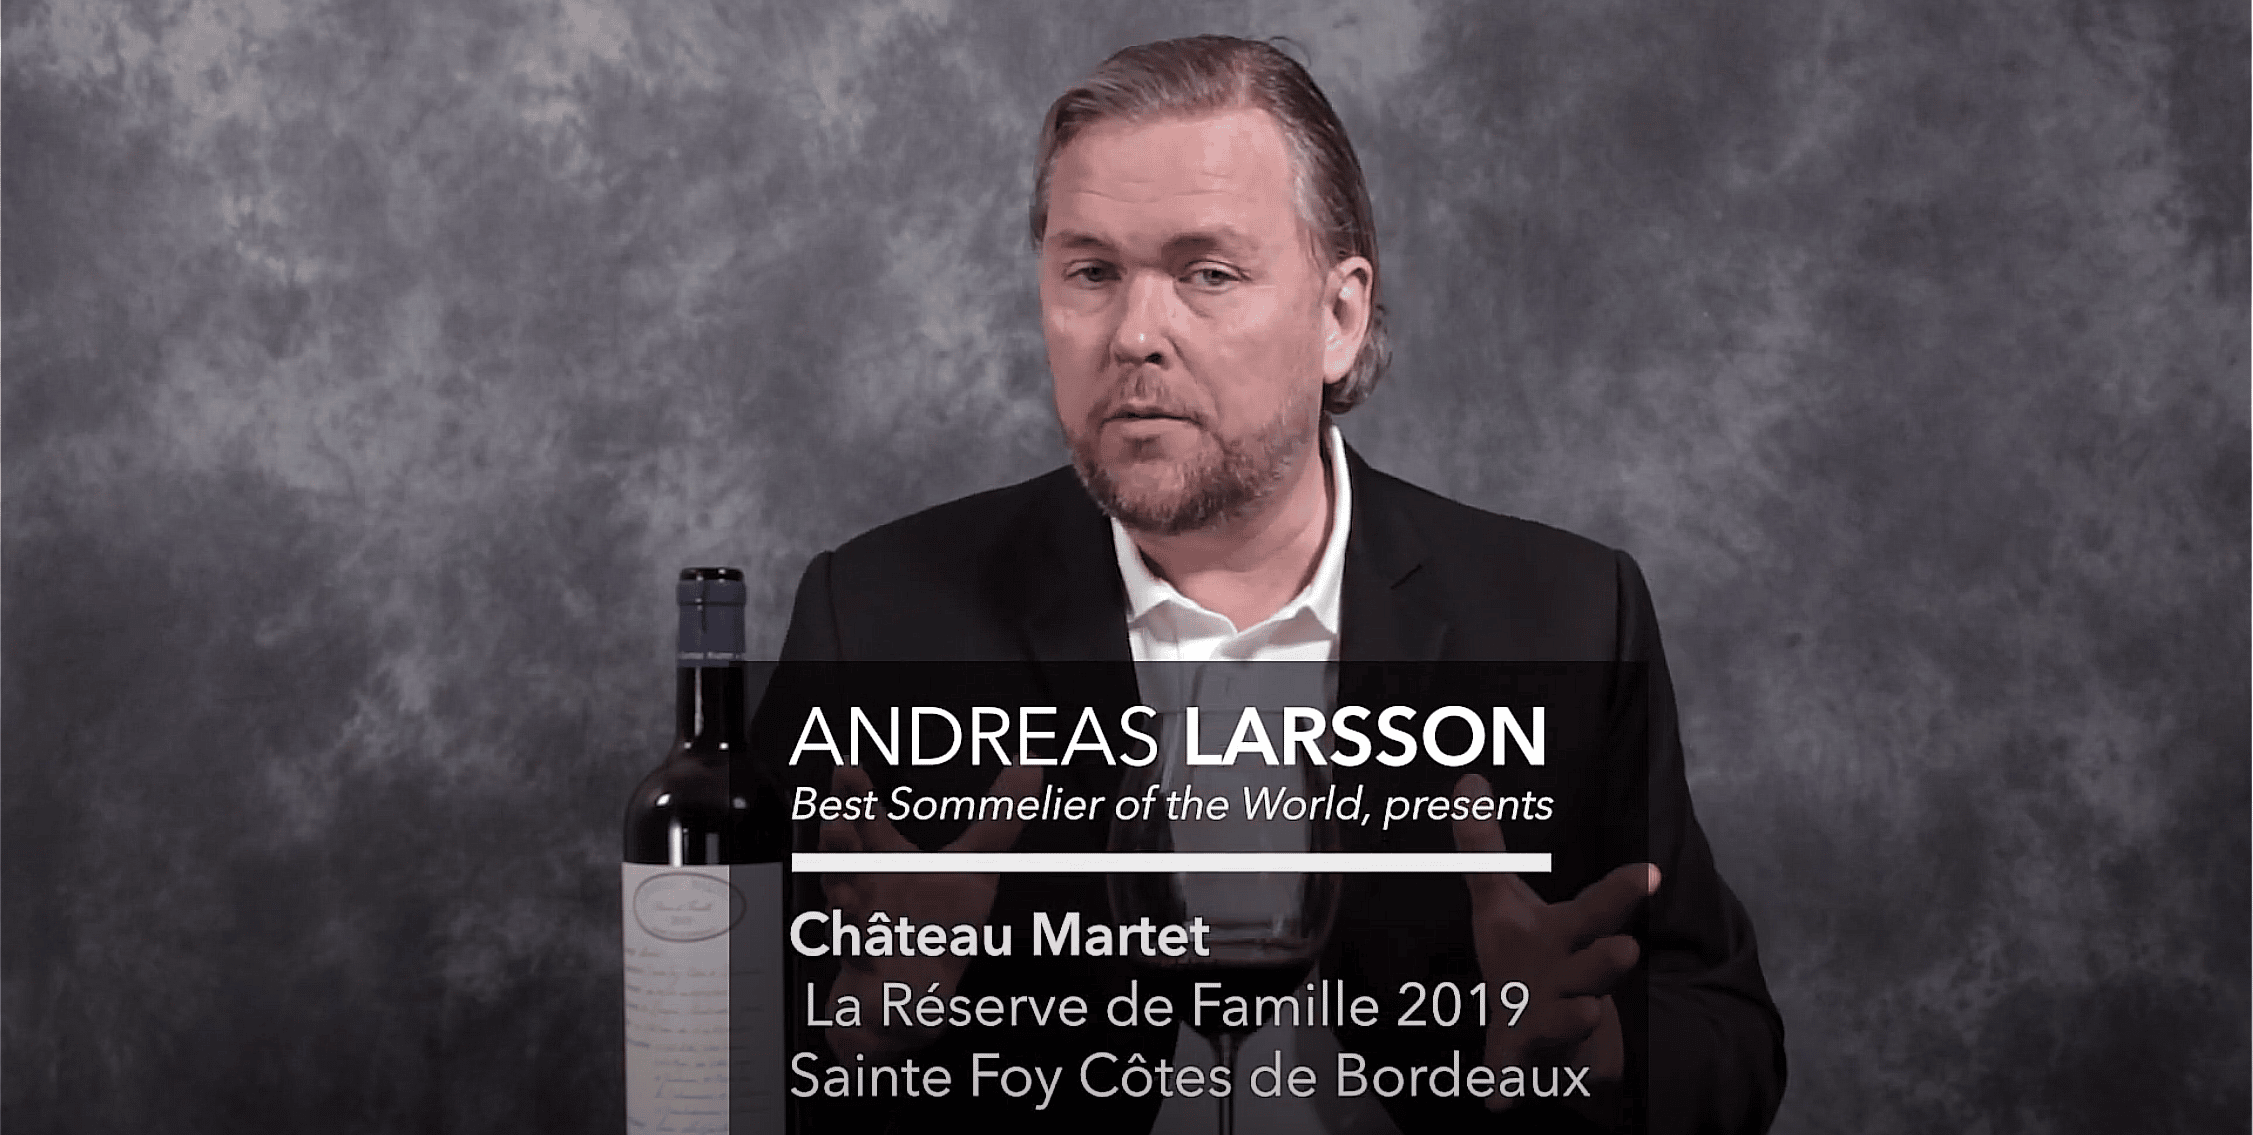 de Coninck Wine Merchant Château Martet: Tasted by Andreas Larsson ‘Best Sommelier of the World’